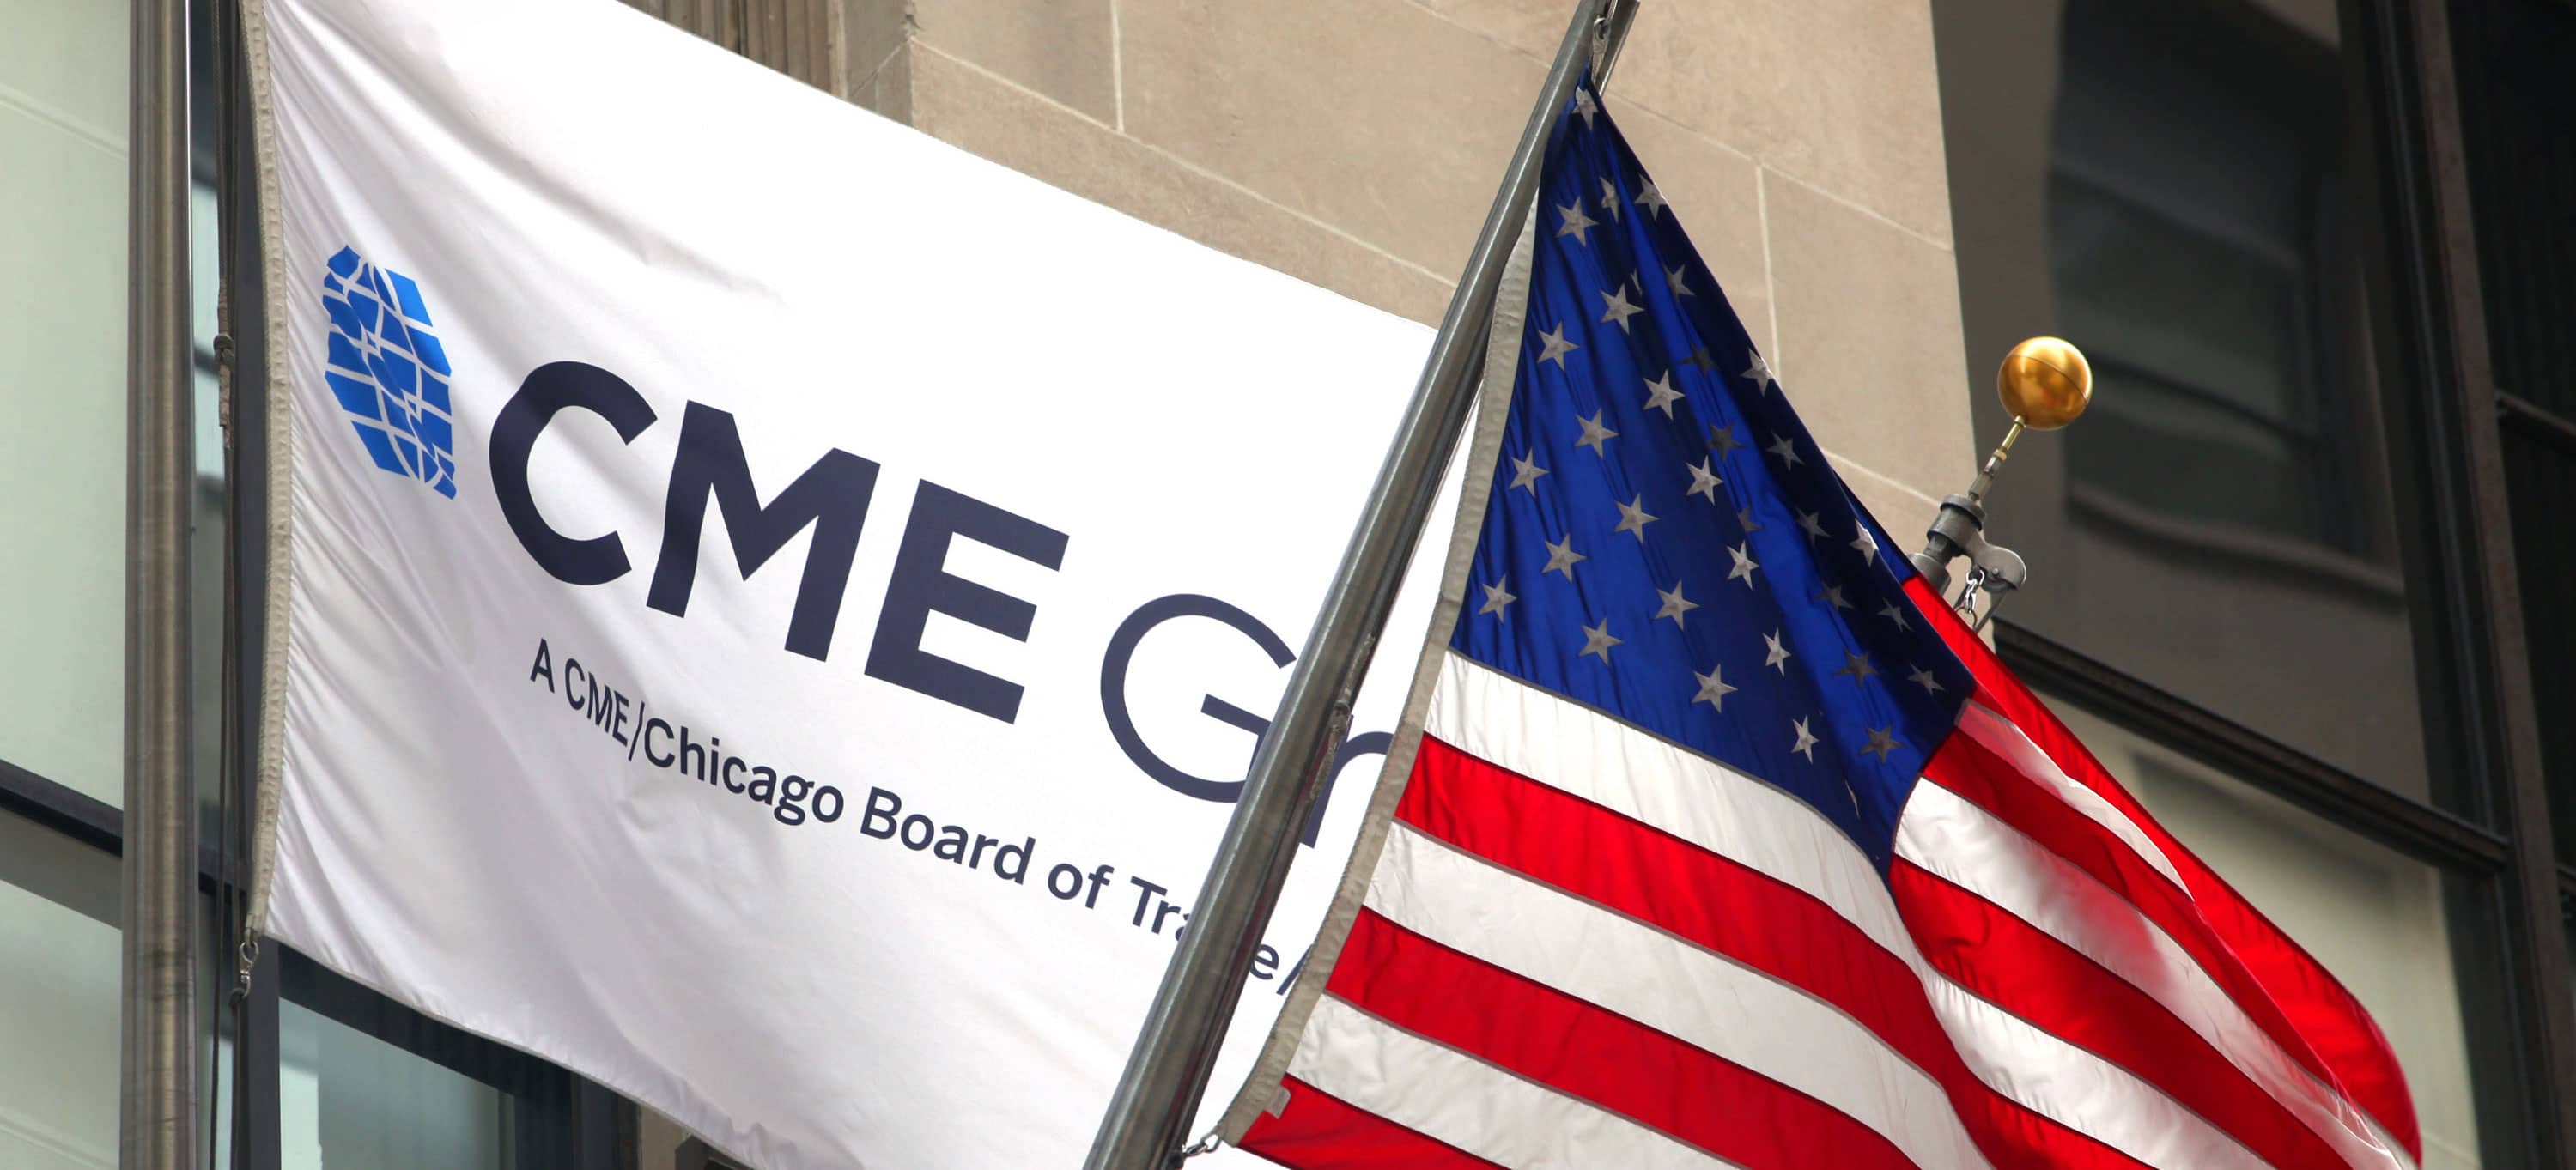 CME Clearing Secures Licence to Clear Interest Rate Swaps in Japan